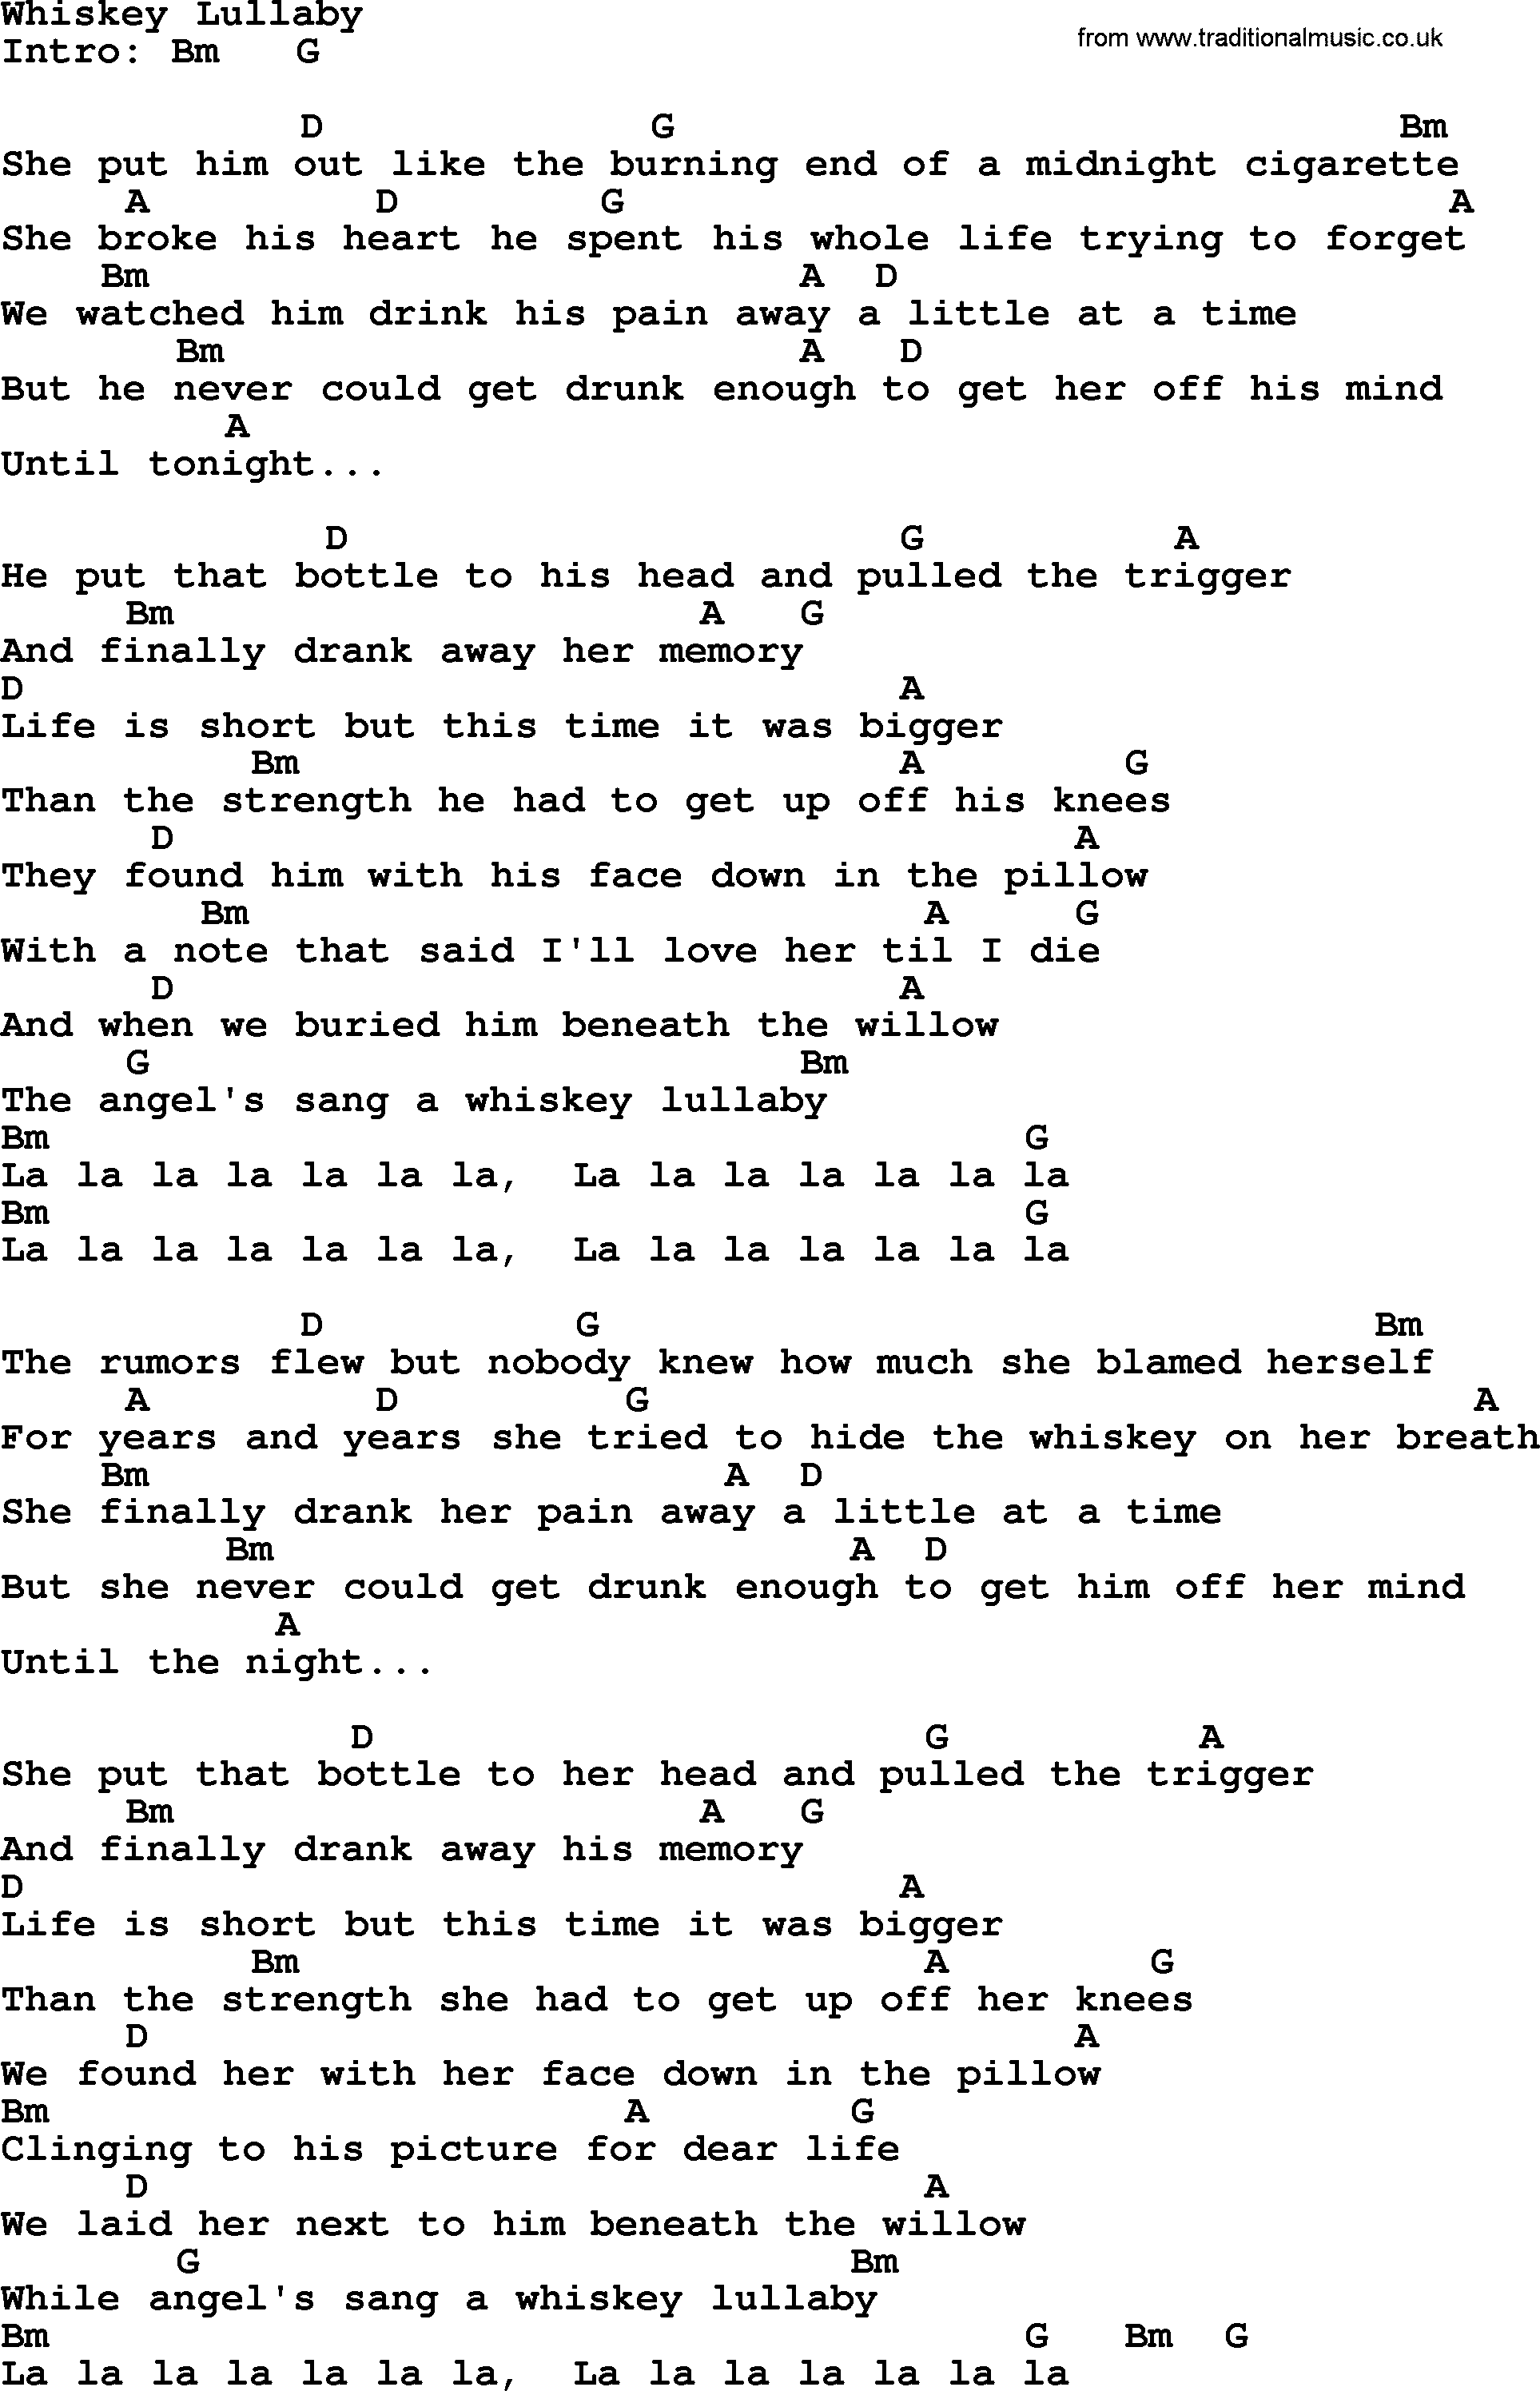 Bluegrass song: Whiskey Lullaby, lyrics and chords